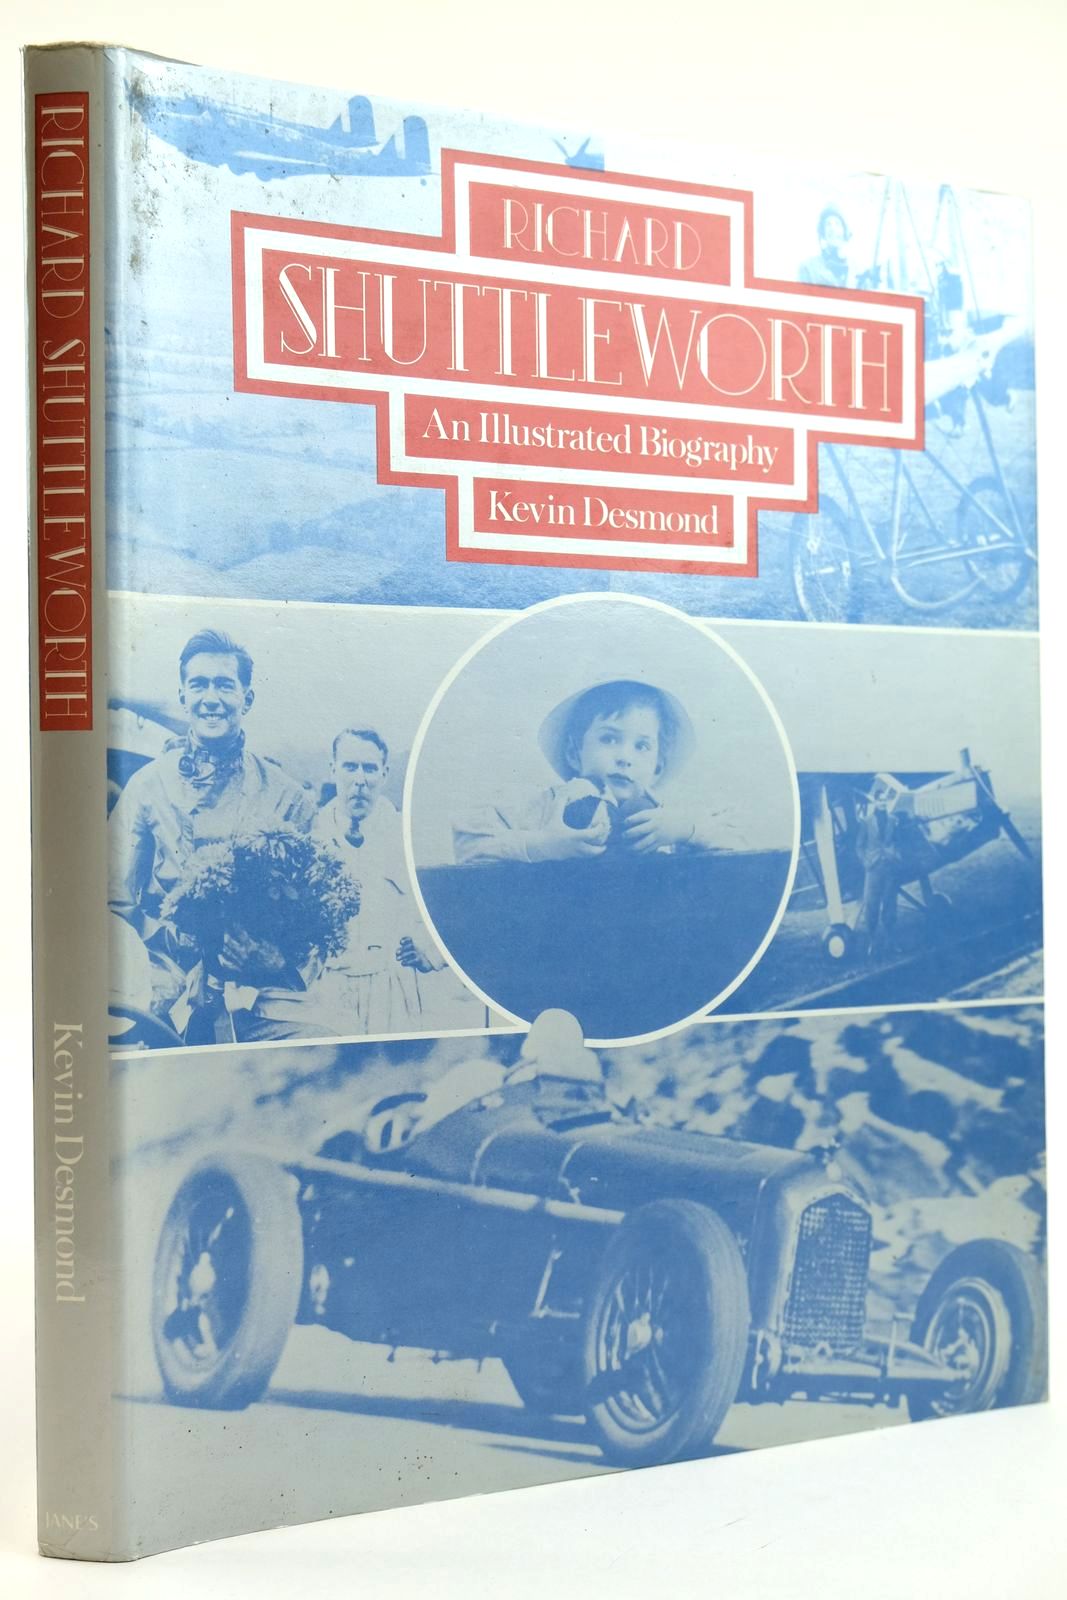 Photo of RICHARD SHUTTLEWORTH AN ILLUSTRATED BIOGRAPHY written by Desmond, Kevin published by Janes Publishing Co. Ltd. (STOCK CODE: 2132139)  for sale by Stella & Rose's Books